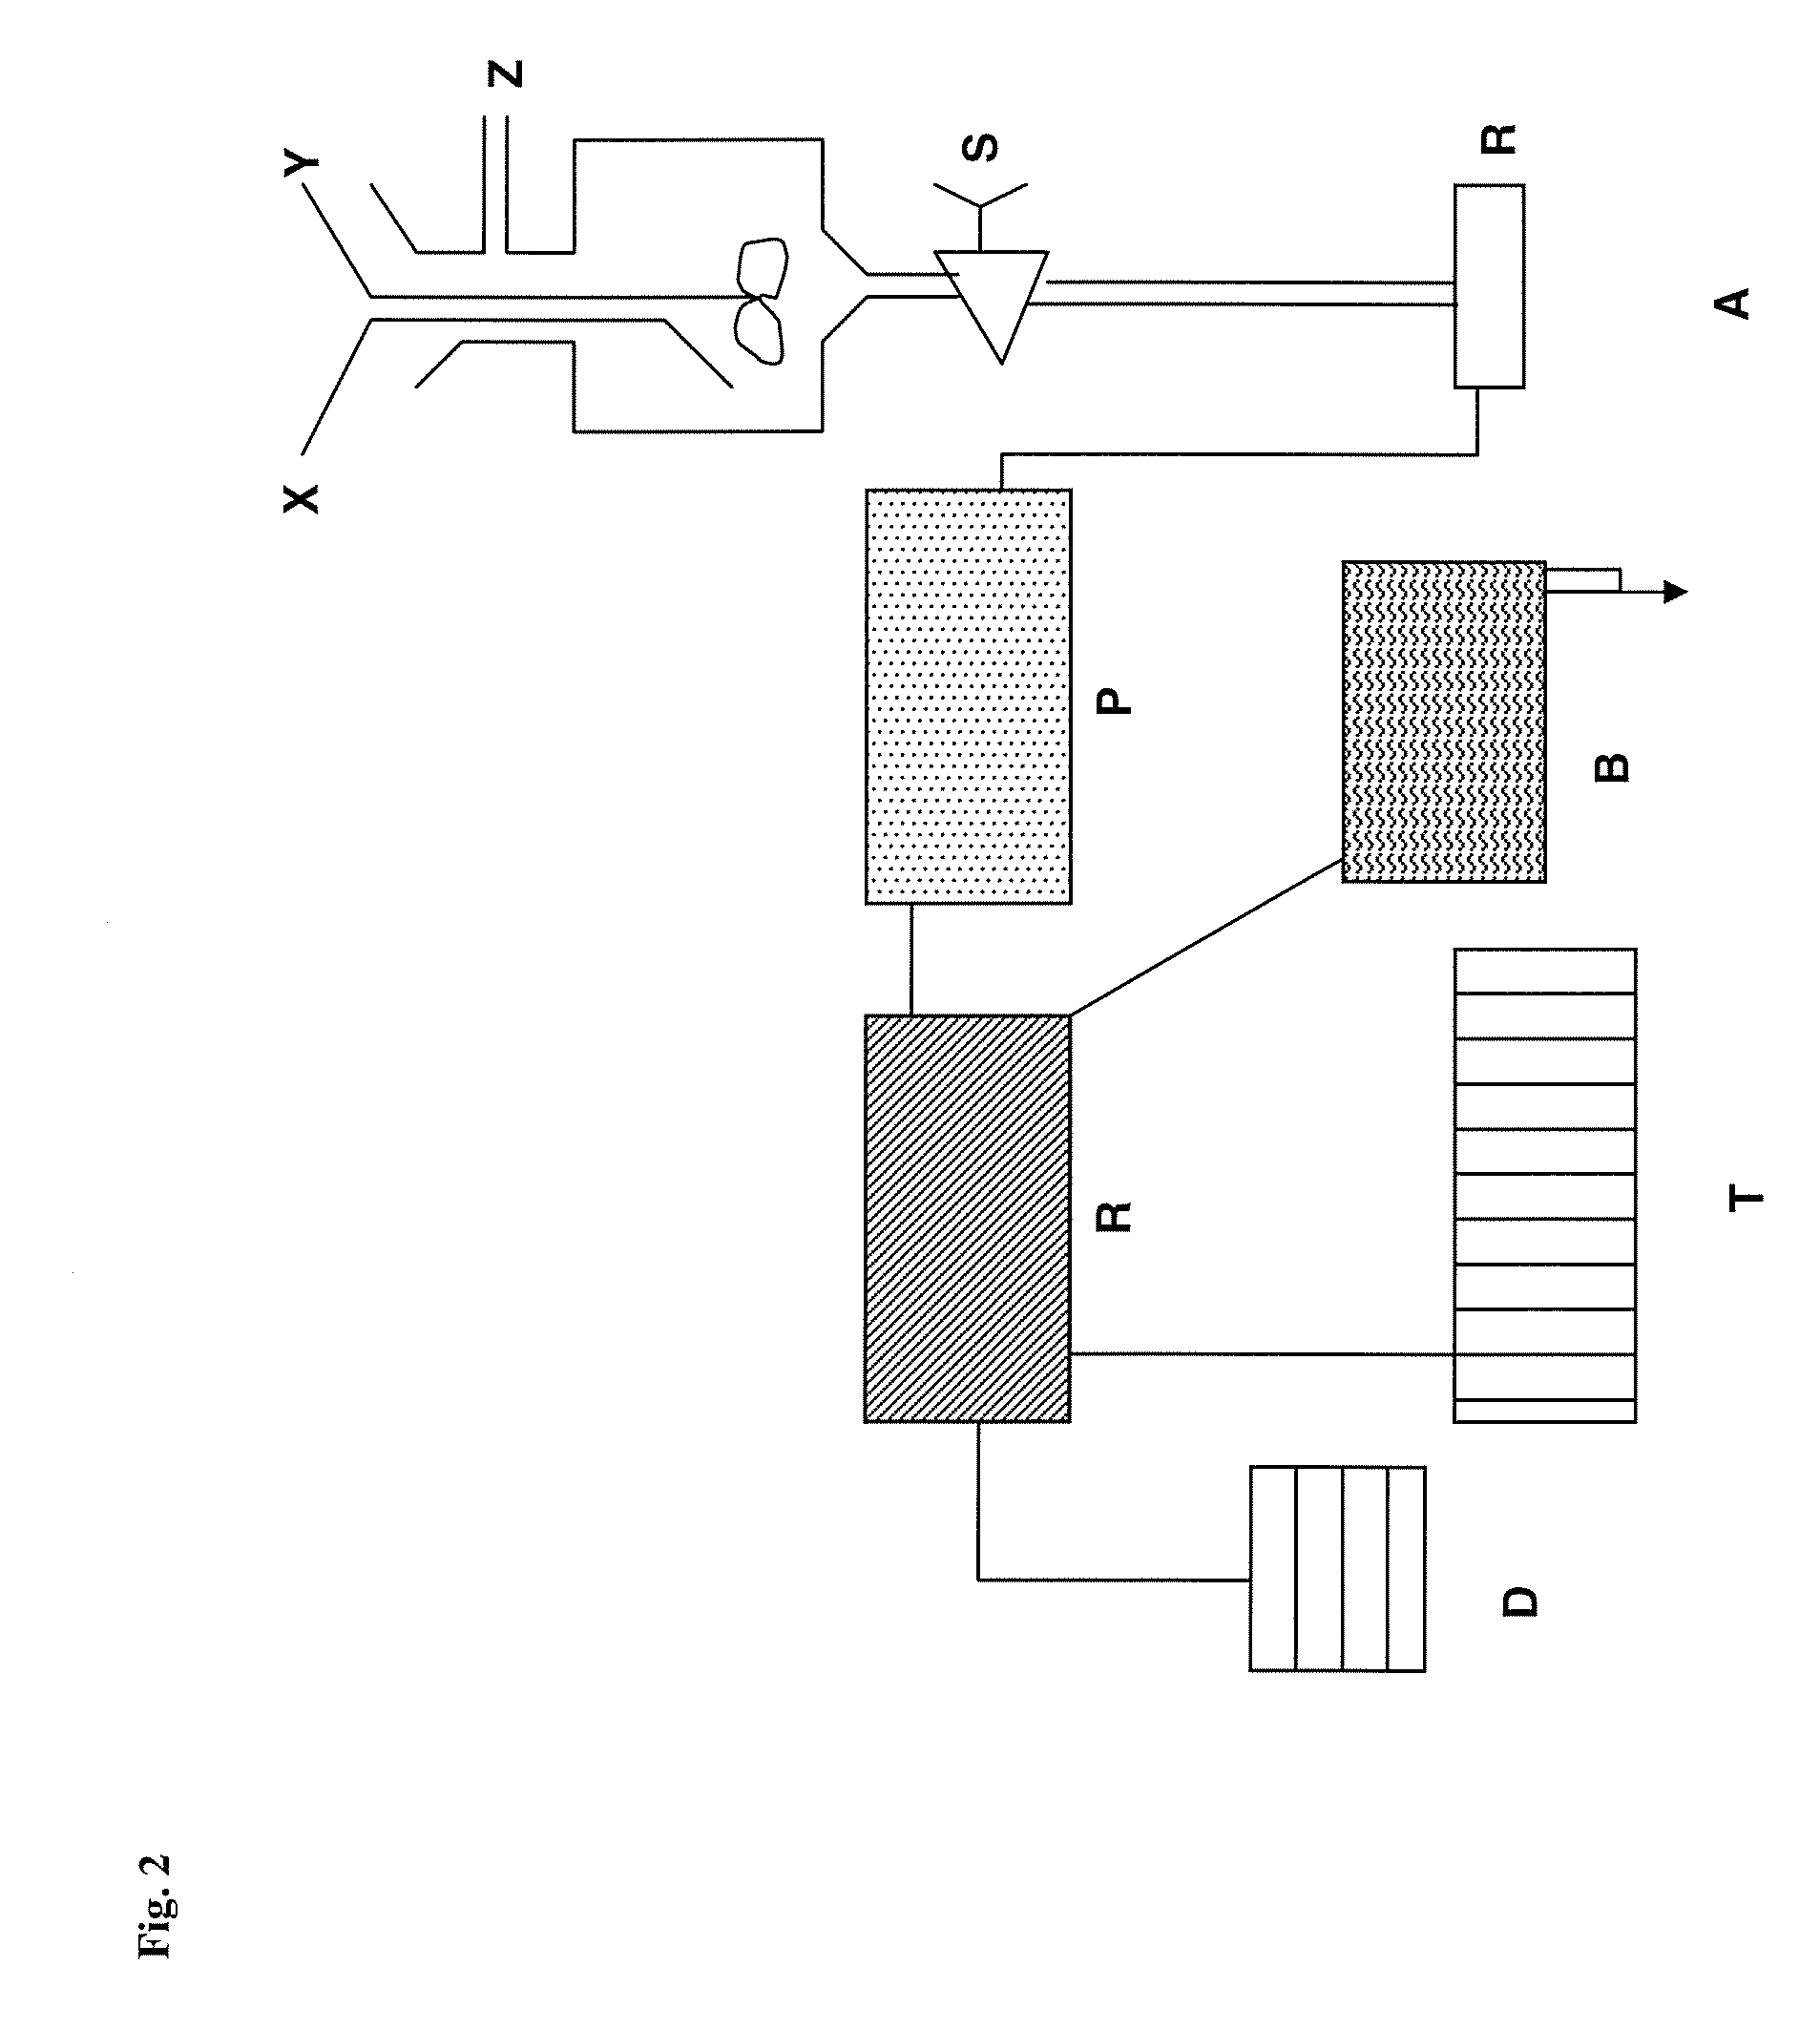 Method for improved removal of cations by means of chelating resins